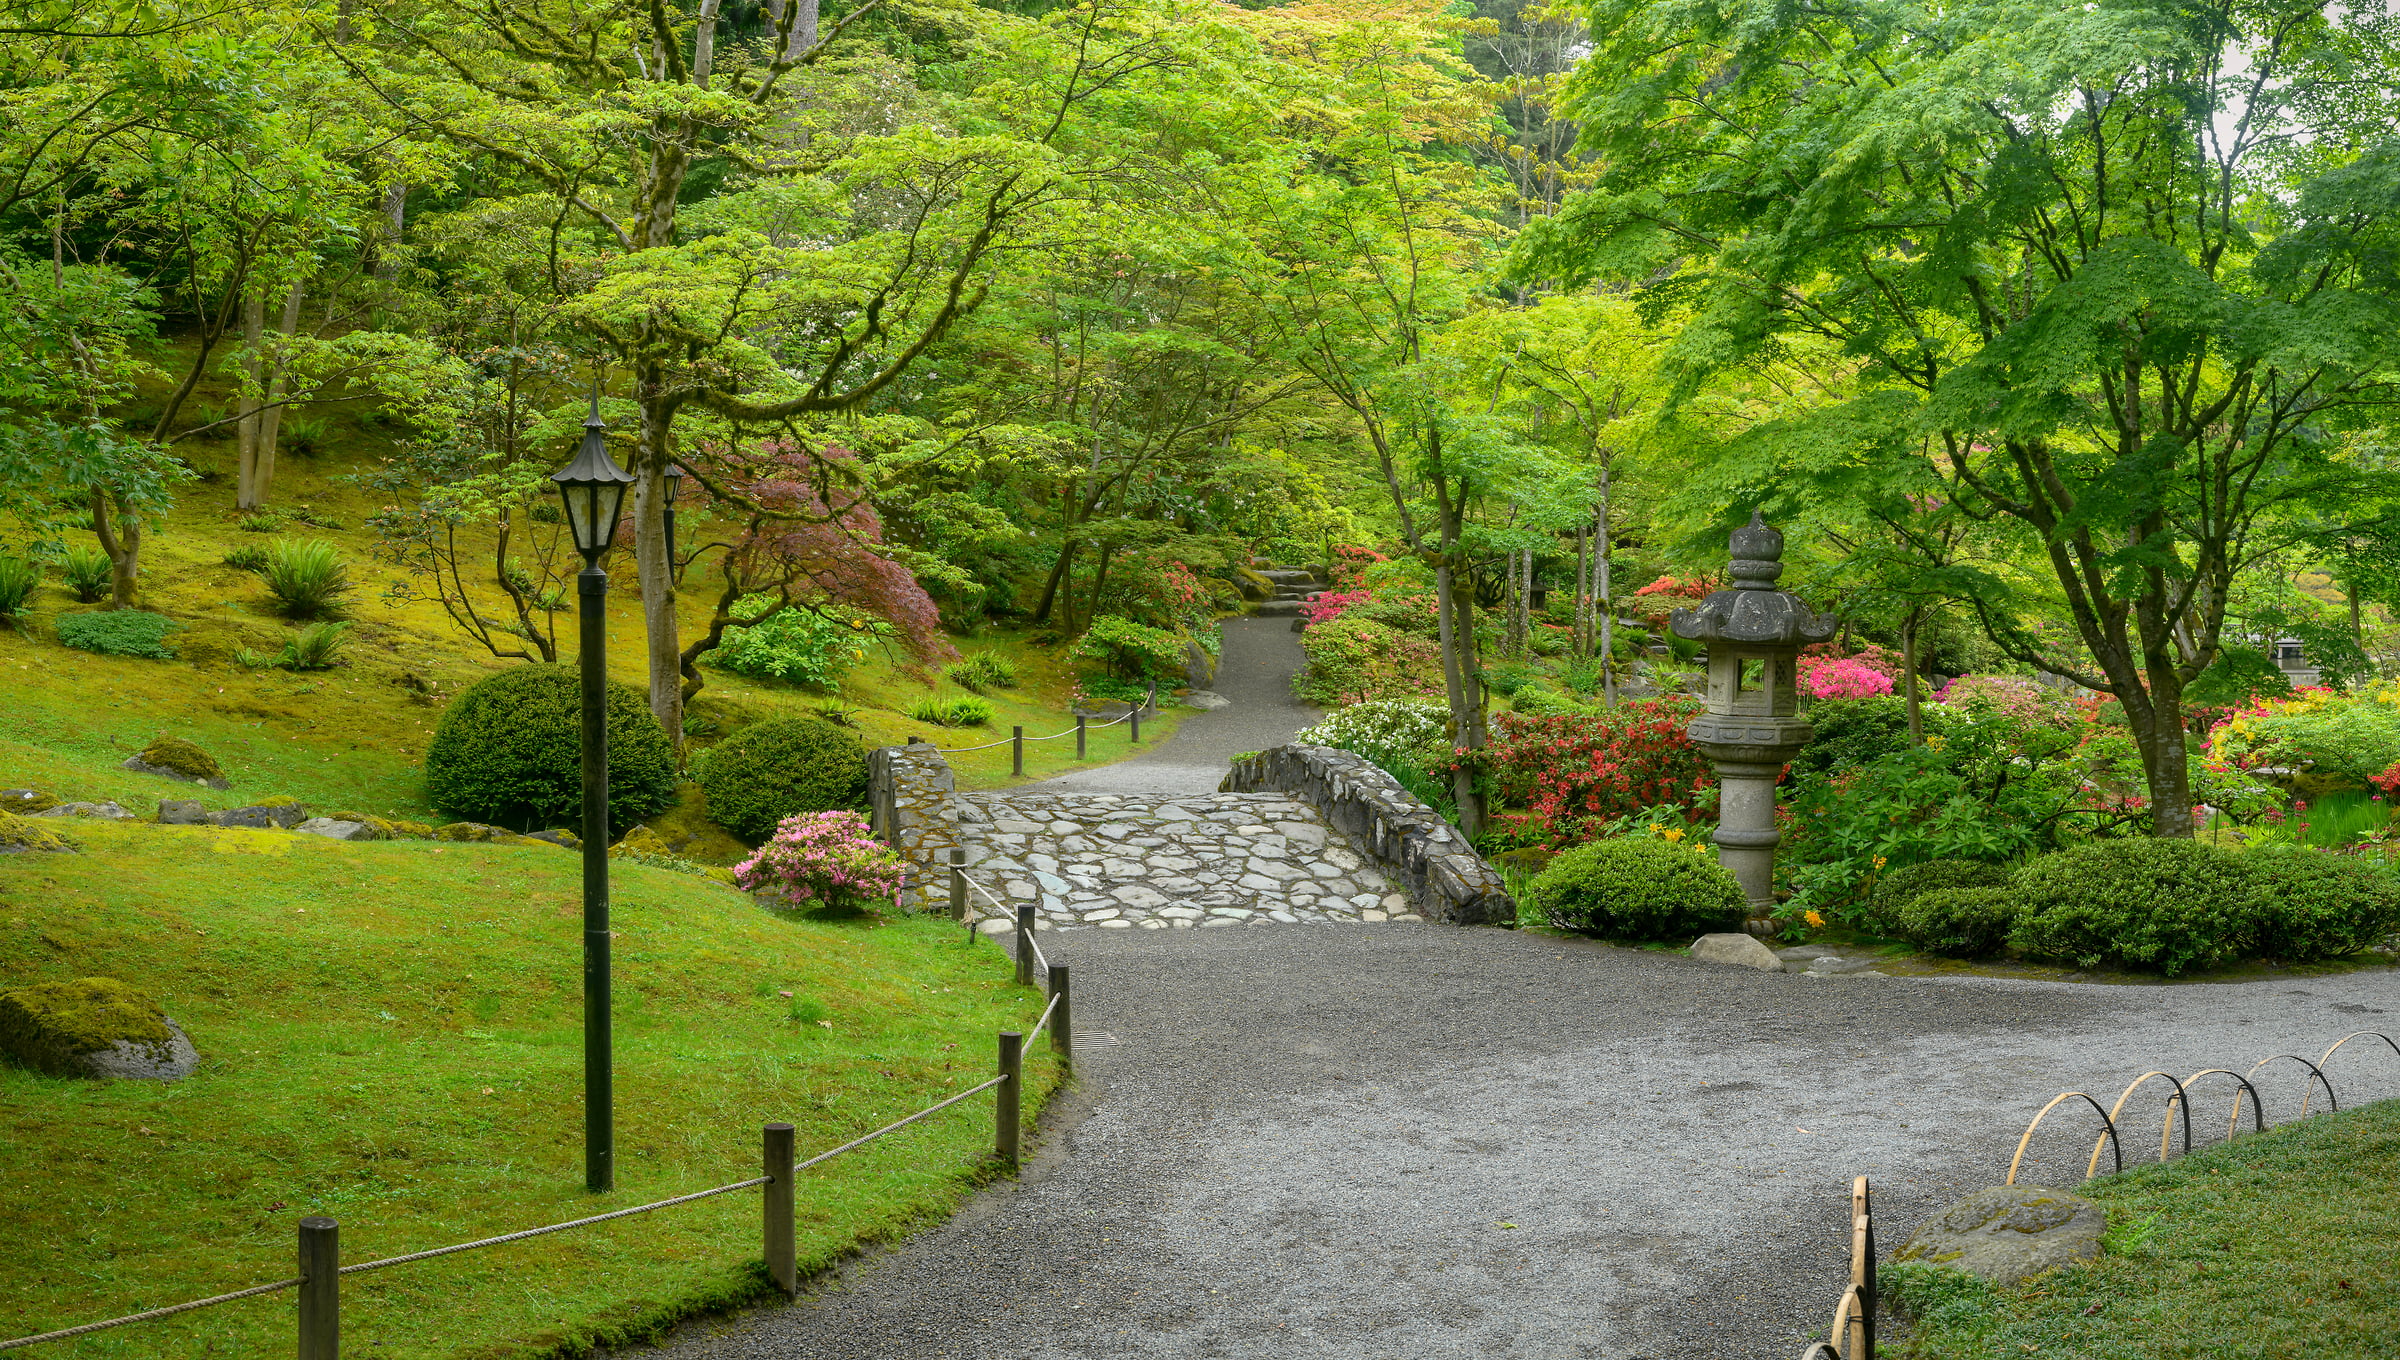 153 megapixels! A very high resolution, large-format VAST photo print of a Japanese garden with green foliage and a walkway; photograph created by Greg Probst in Japanese Garden, Seattle